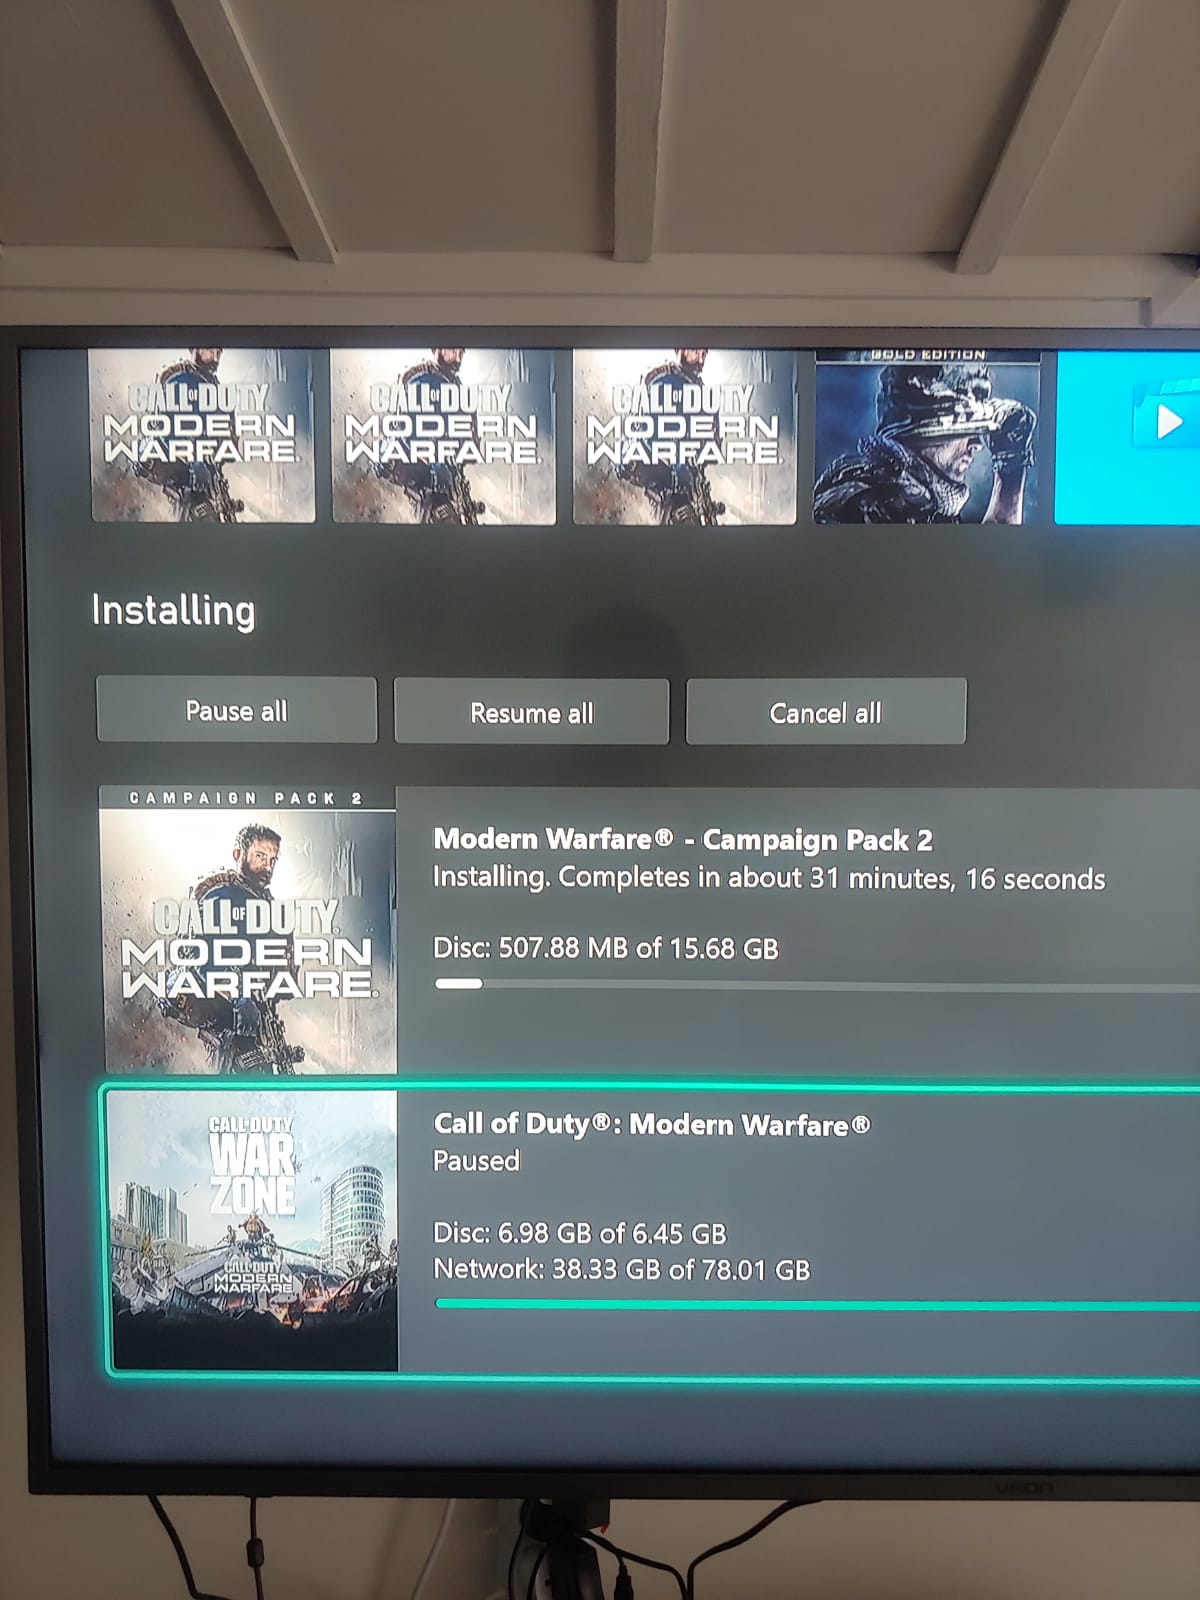 PS5 pre-load screen confirms Warzone 2 is NOT a separate application, but  directly integrated into Modern Warfare II much like Modern Warfare 2019/ Warzone before it. : r/CODWarzone